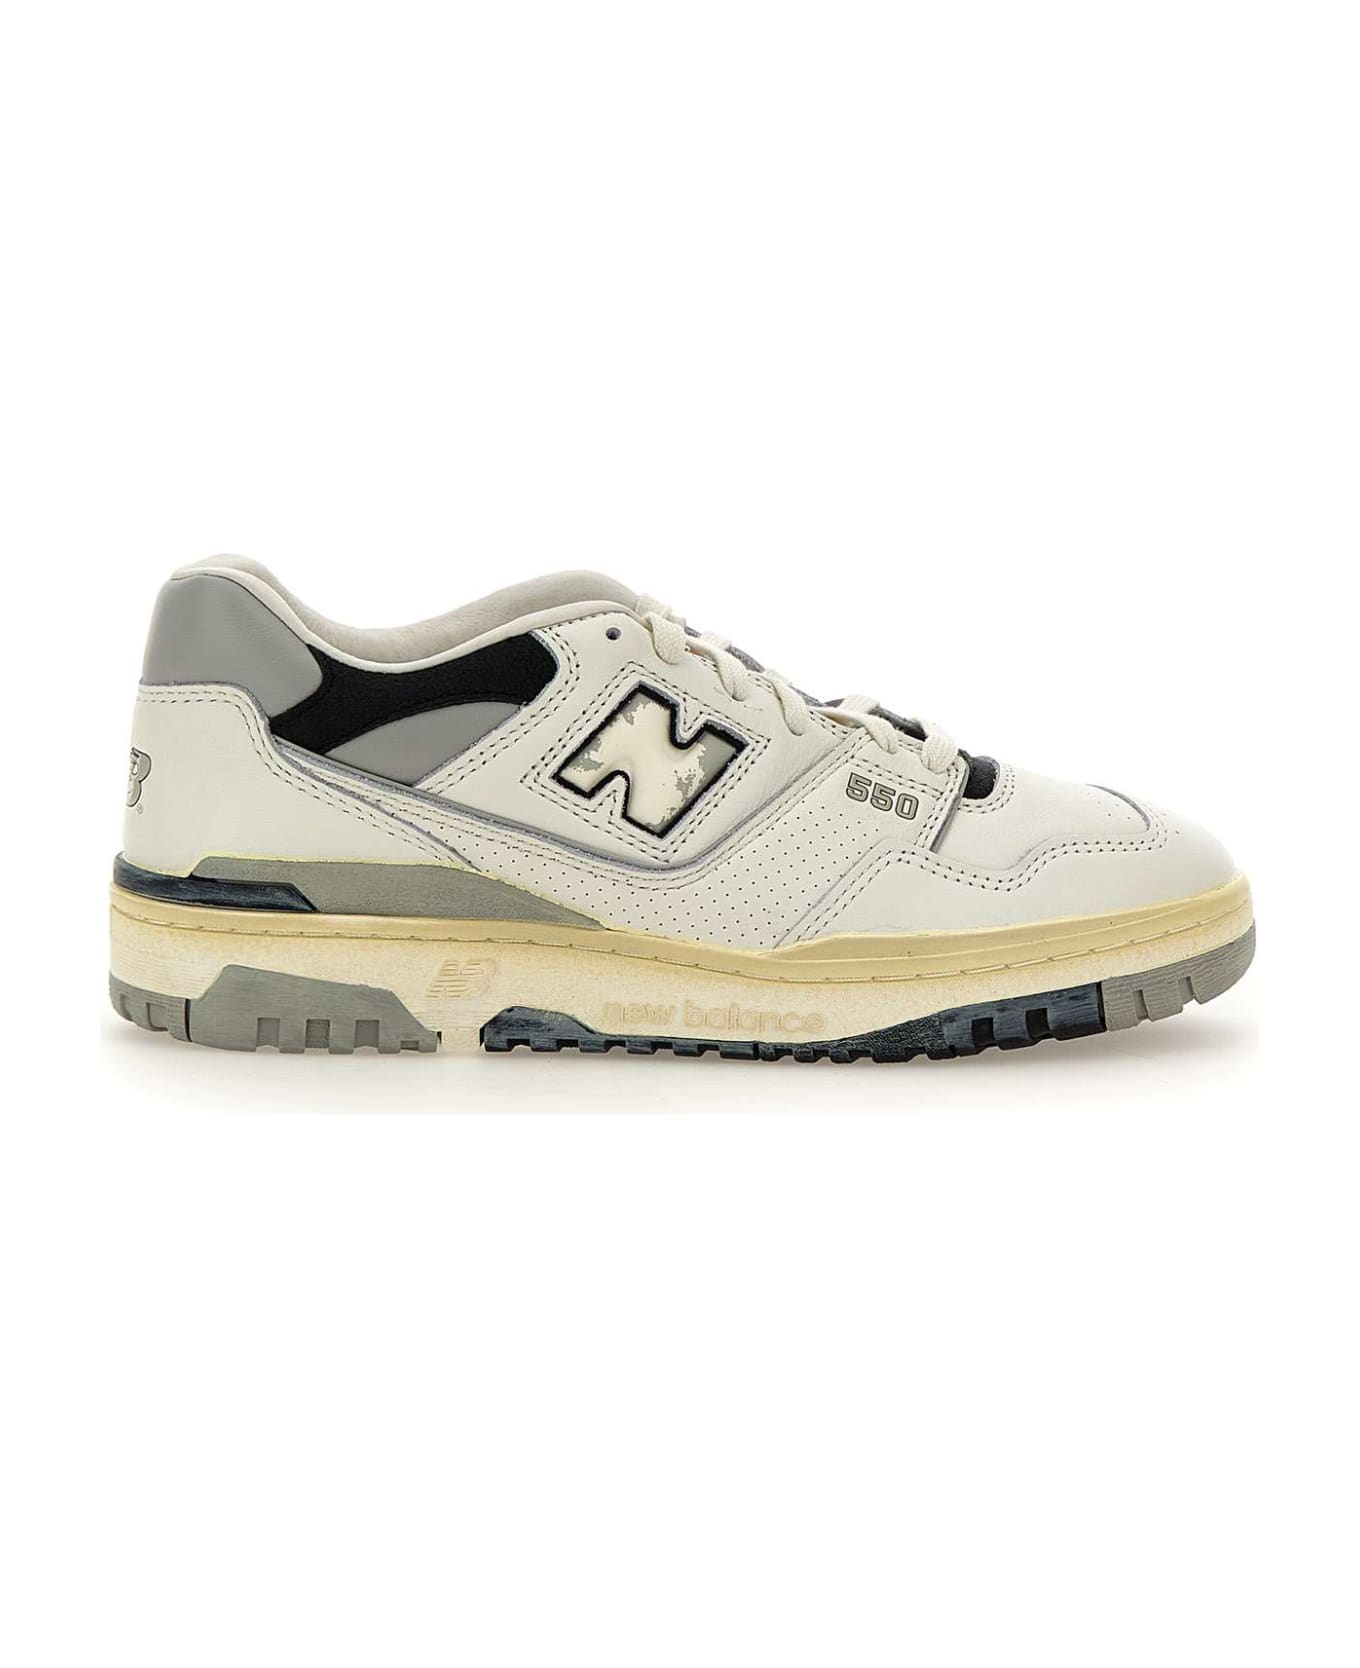 New Balance "550" Leather Sneakers - White-grey